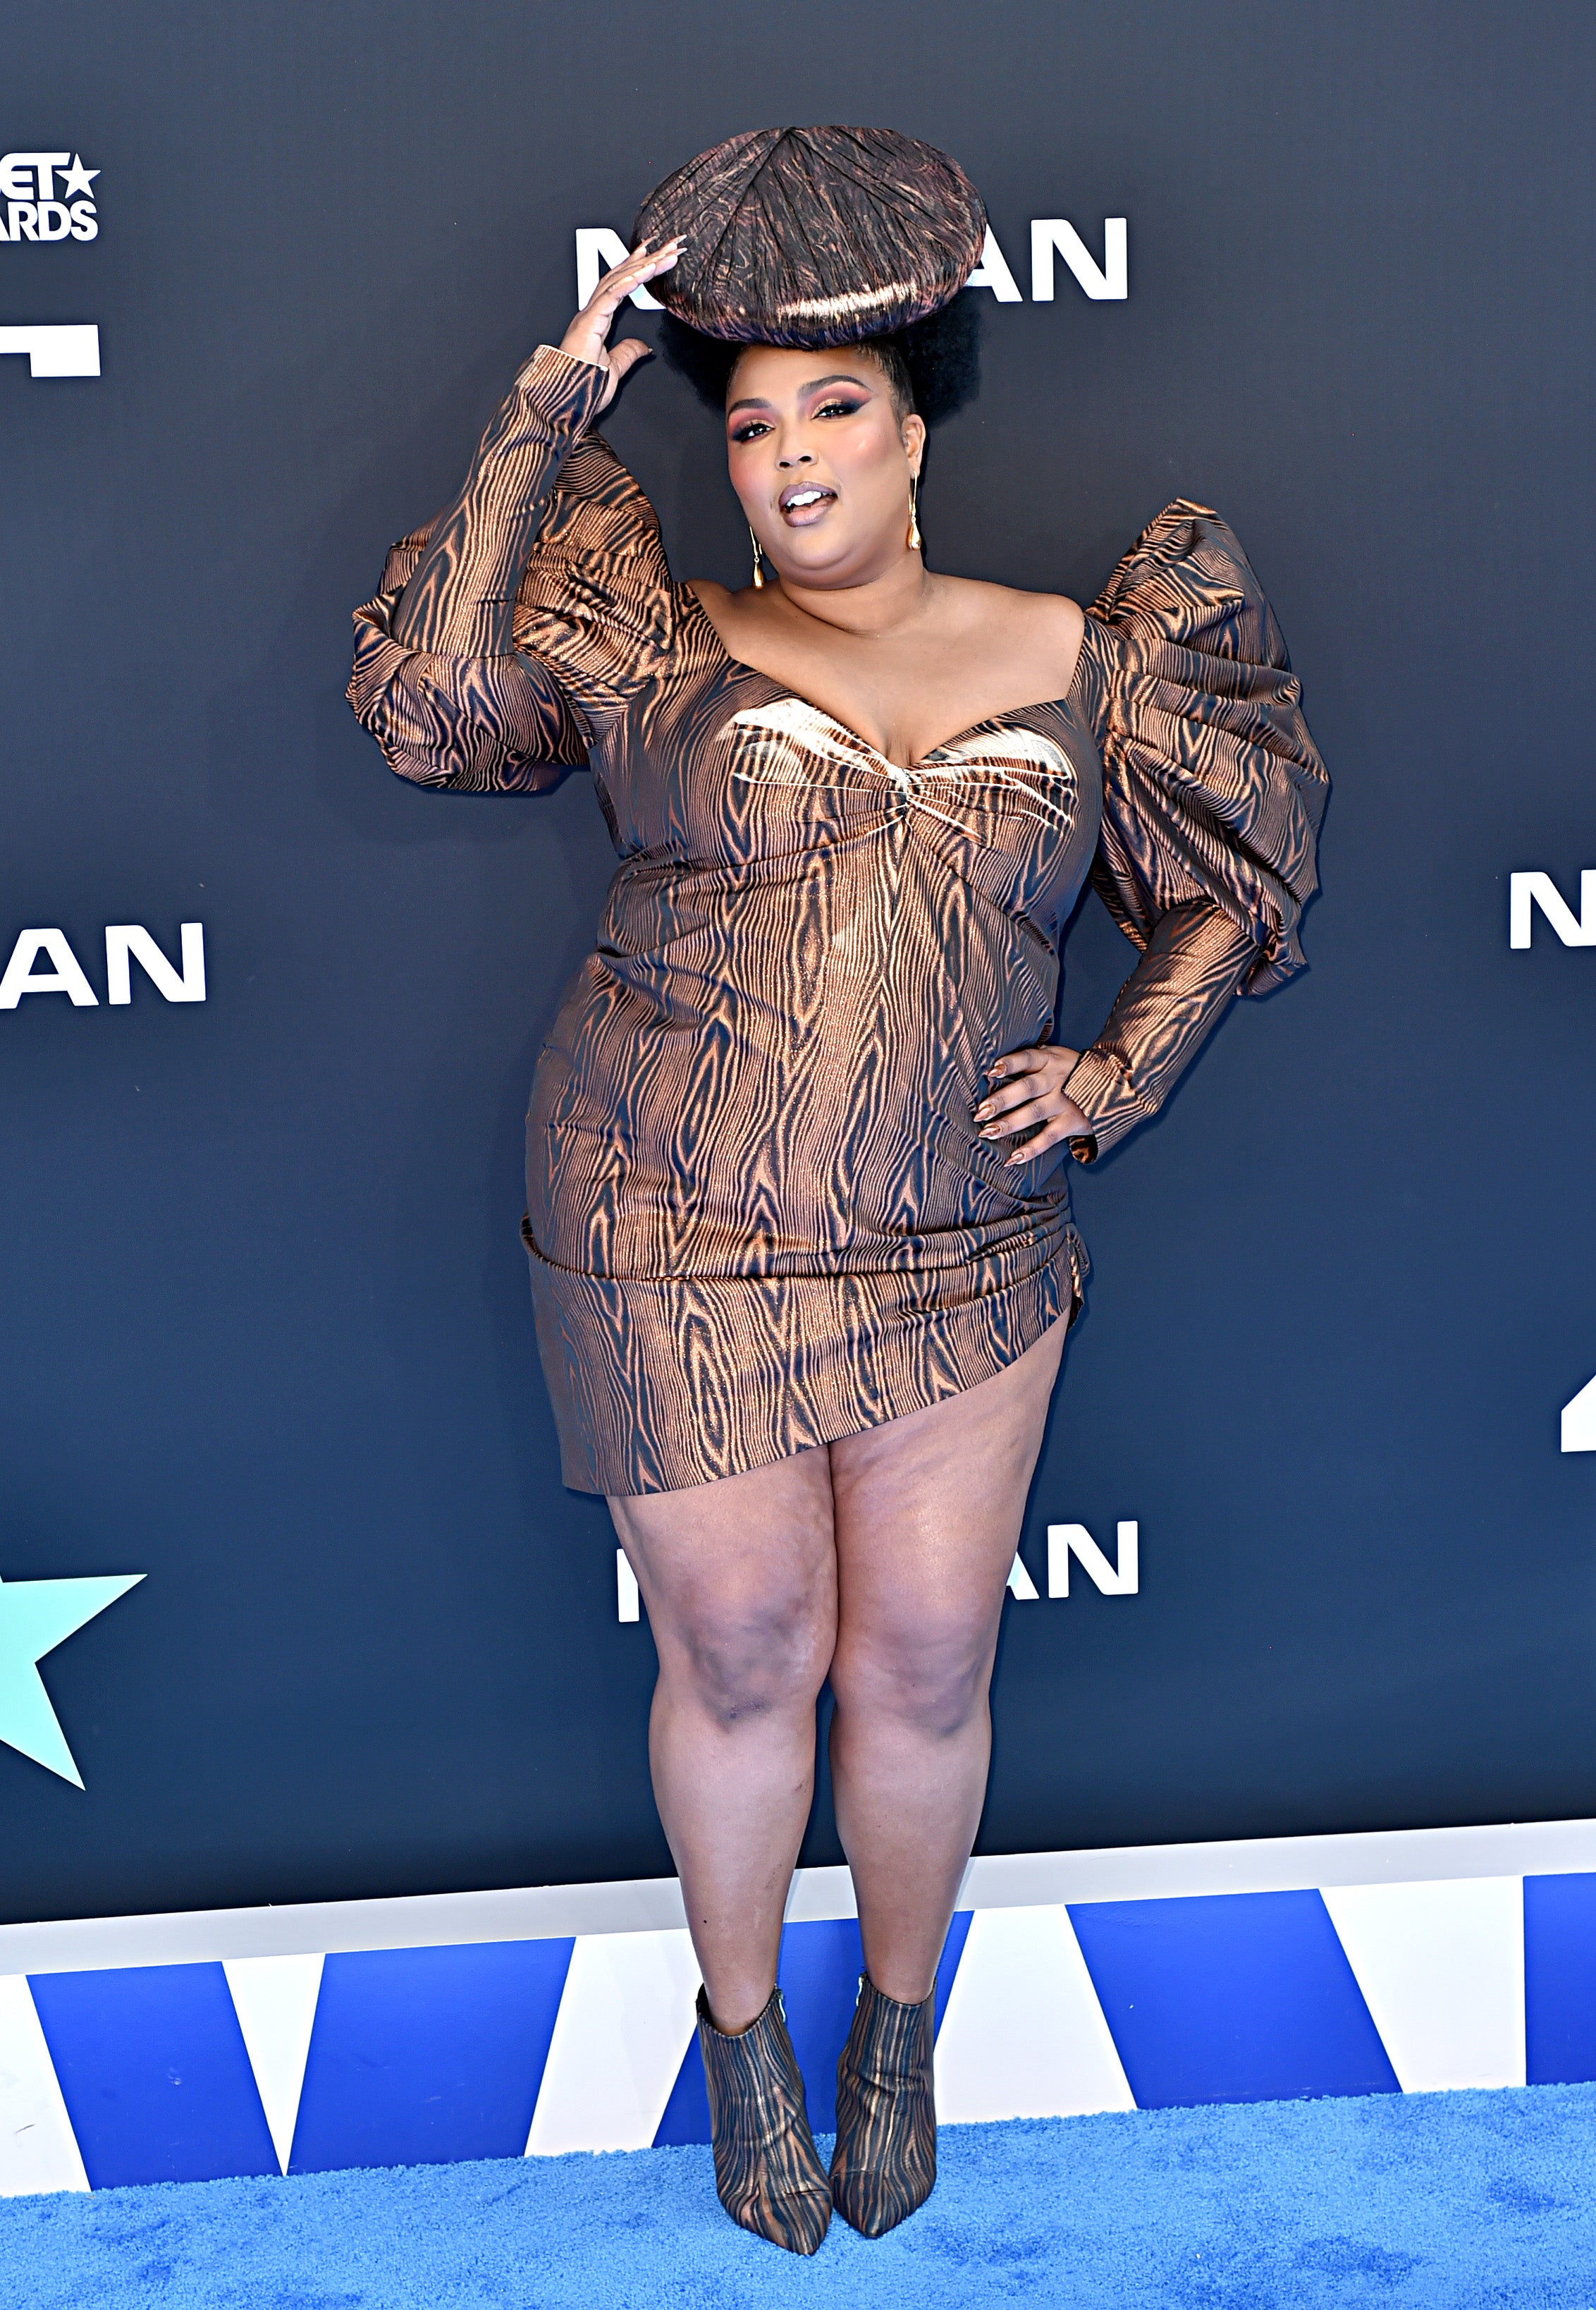 The Best Fashion Moments At The 2019 BET Awards